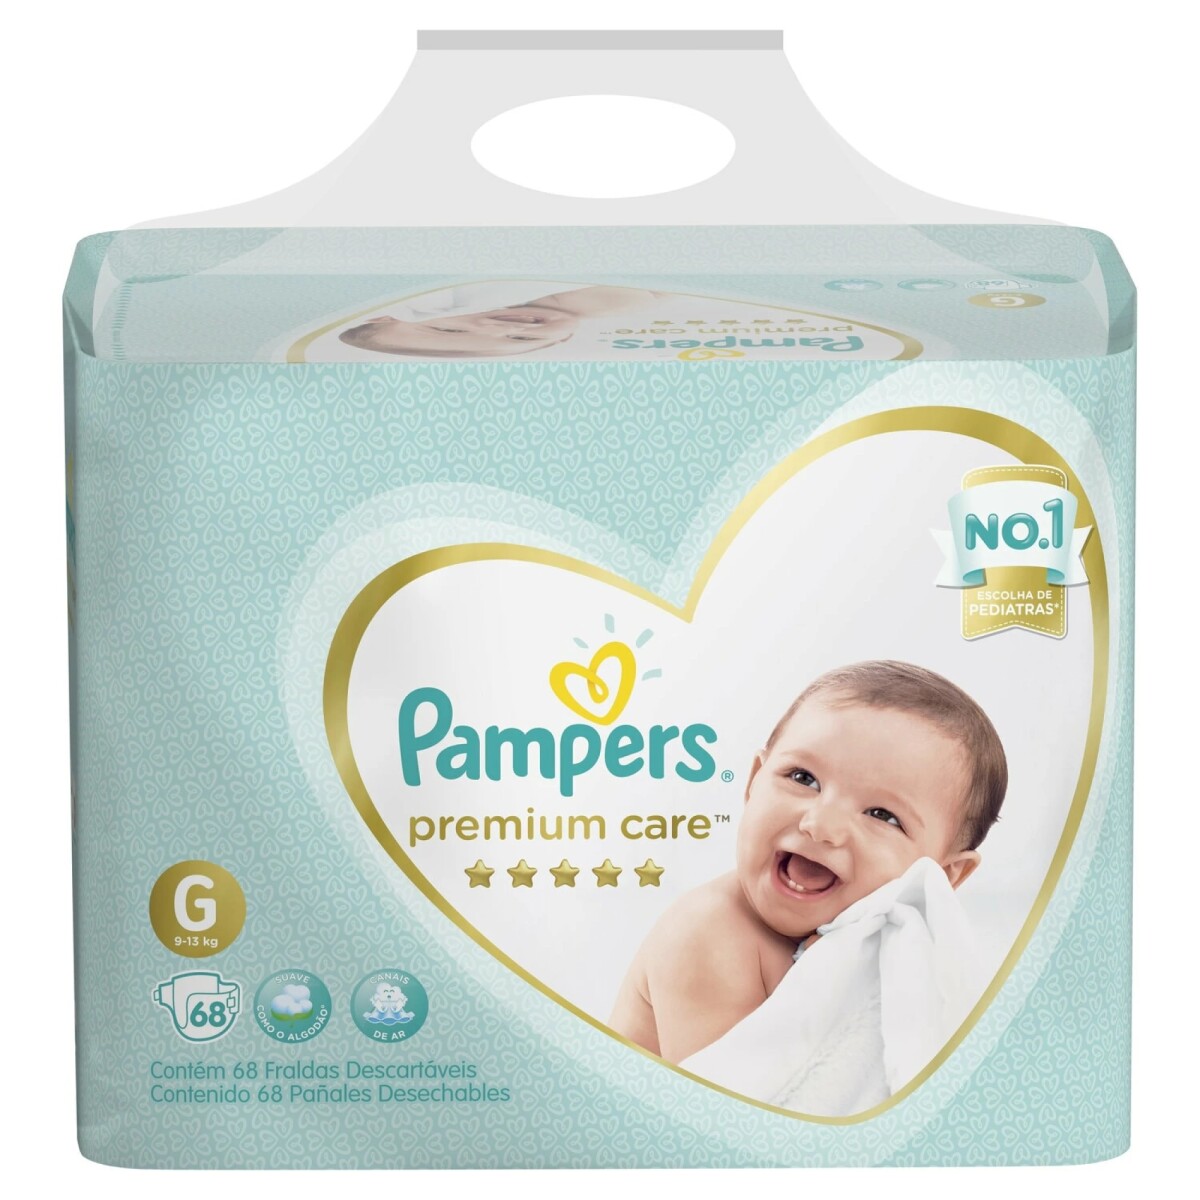 Pañales Pampers Premium Care G - X68 